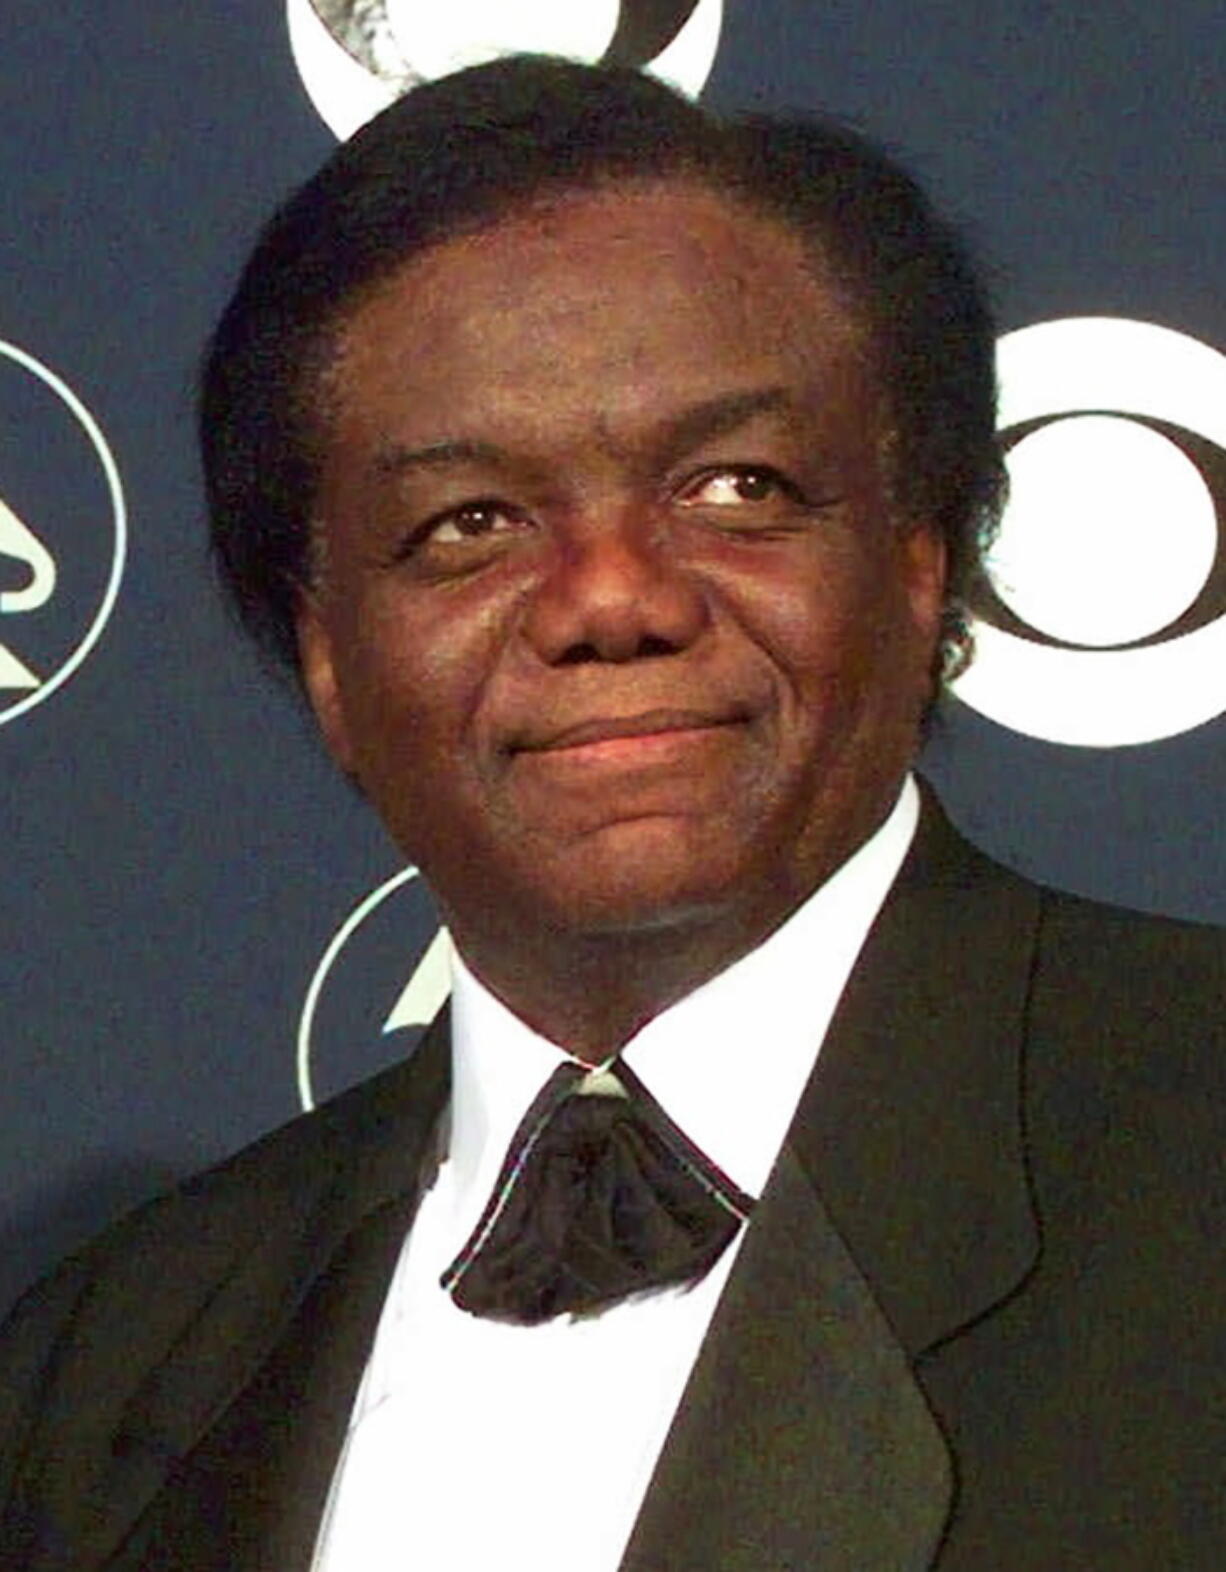 FILE - Songwriter/producer Lamont Dozier appears at the 40th Annual Grammy Awards in New York on Feb. 25, 1998. Dozier, of the celebrated Holland-Dozier-Holland team that wrote and produced "You Can't Hurry Love," "Heat Wave" and dozens of other hits and helped make Motown an essential record company of the 1960s and beyond, has died at age 81.